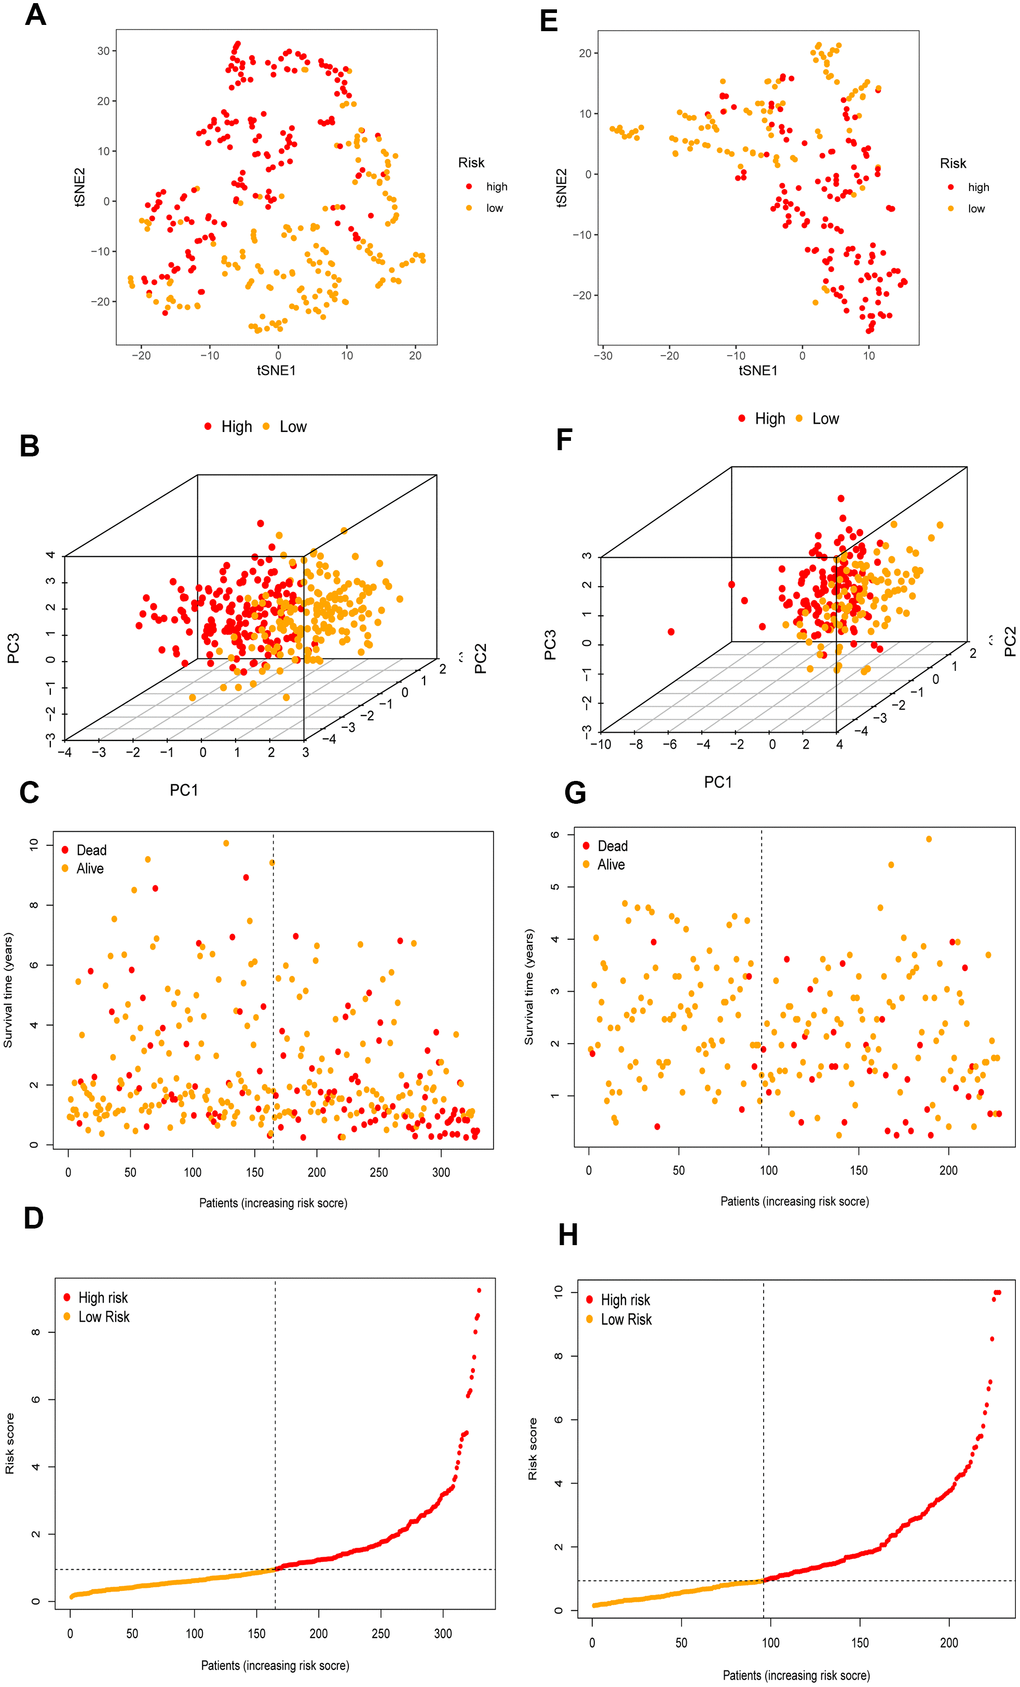 The validation of the risk prognostic model in HCC patients. (A–D) t-SNE, PCA, survival status scatter plots and risk score distribution shown the power prognostic ability of the risk prognostic model in TCGA. (E–H) t-SNE, PCA, survival status scatter plots and risk score distribution shown the power prognostic ability of the risk prognostic model in ICGC.